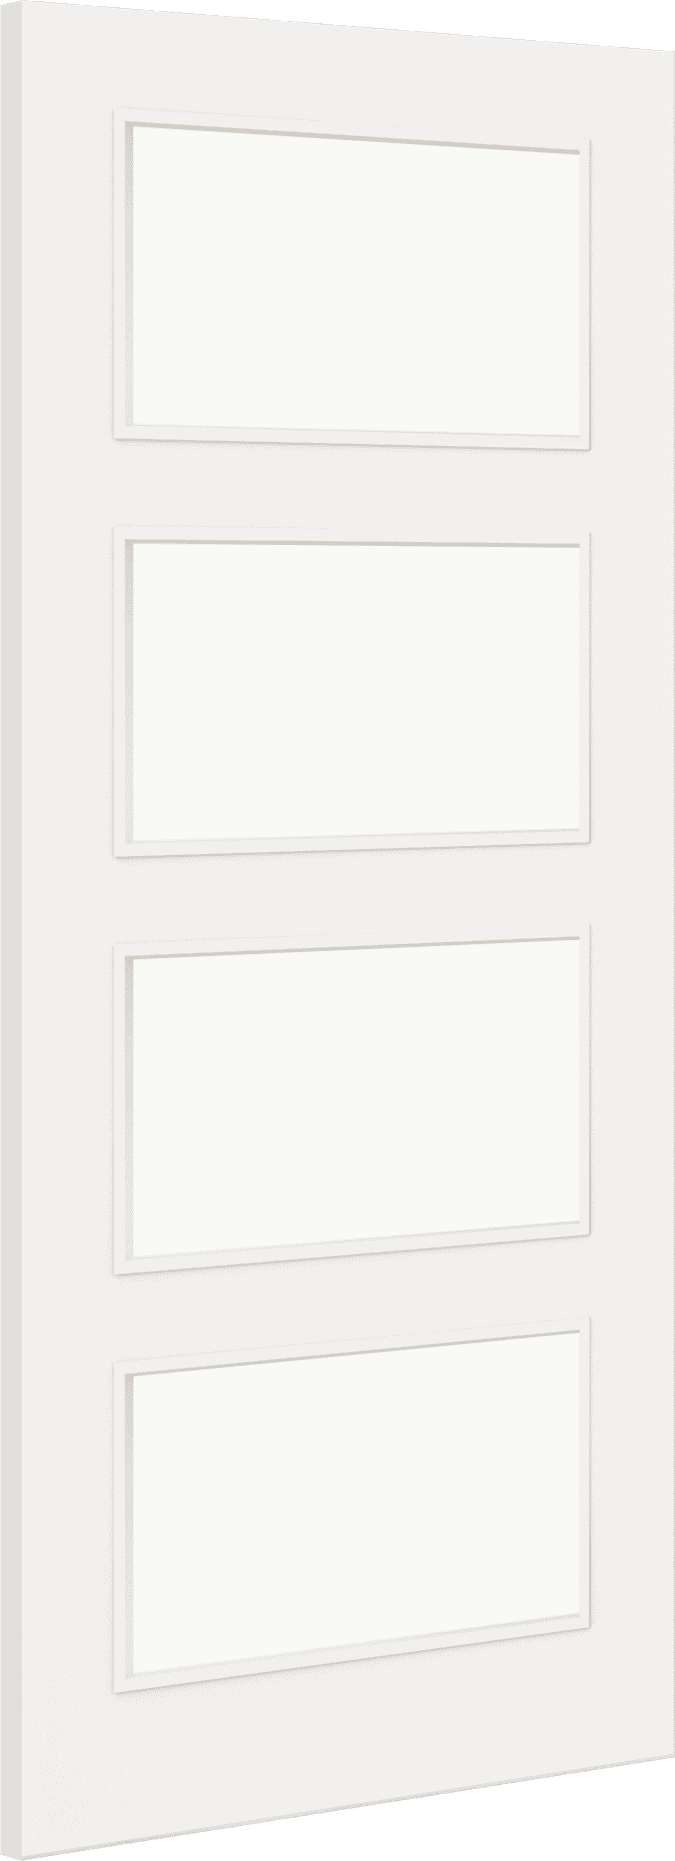 1981mm x 914mm x 44mm (36") Architectural Paint Grade White 04 Clear Glazed Fire Door Blank